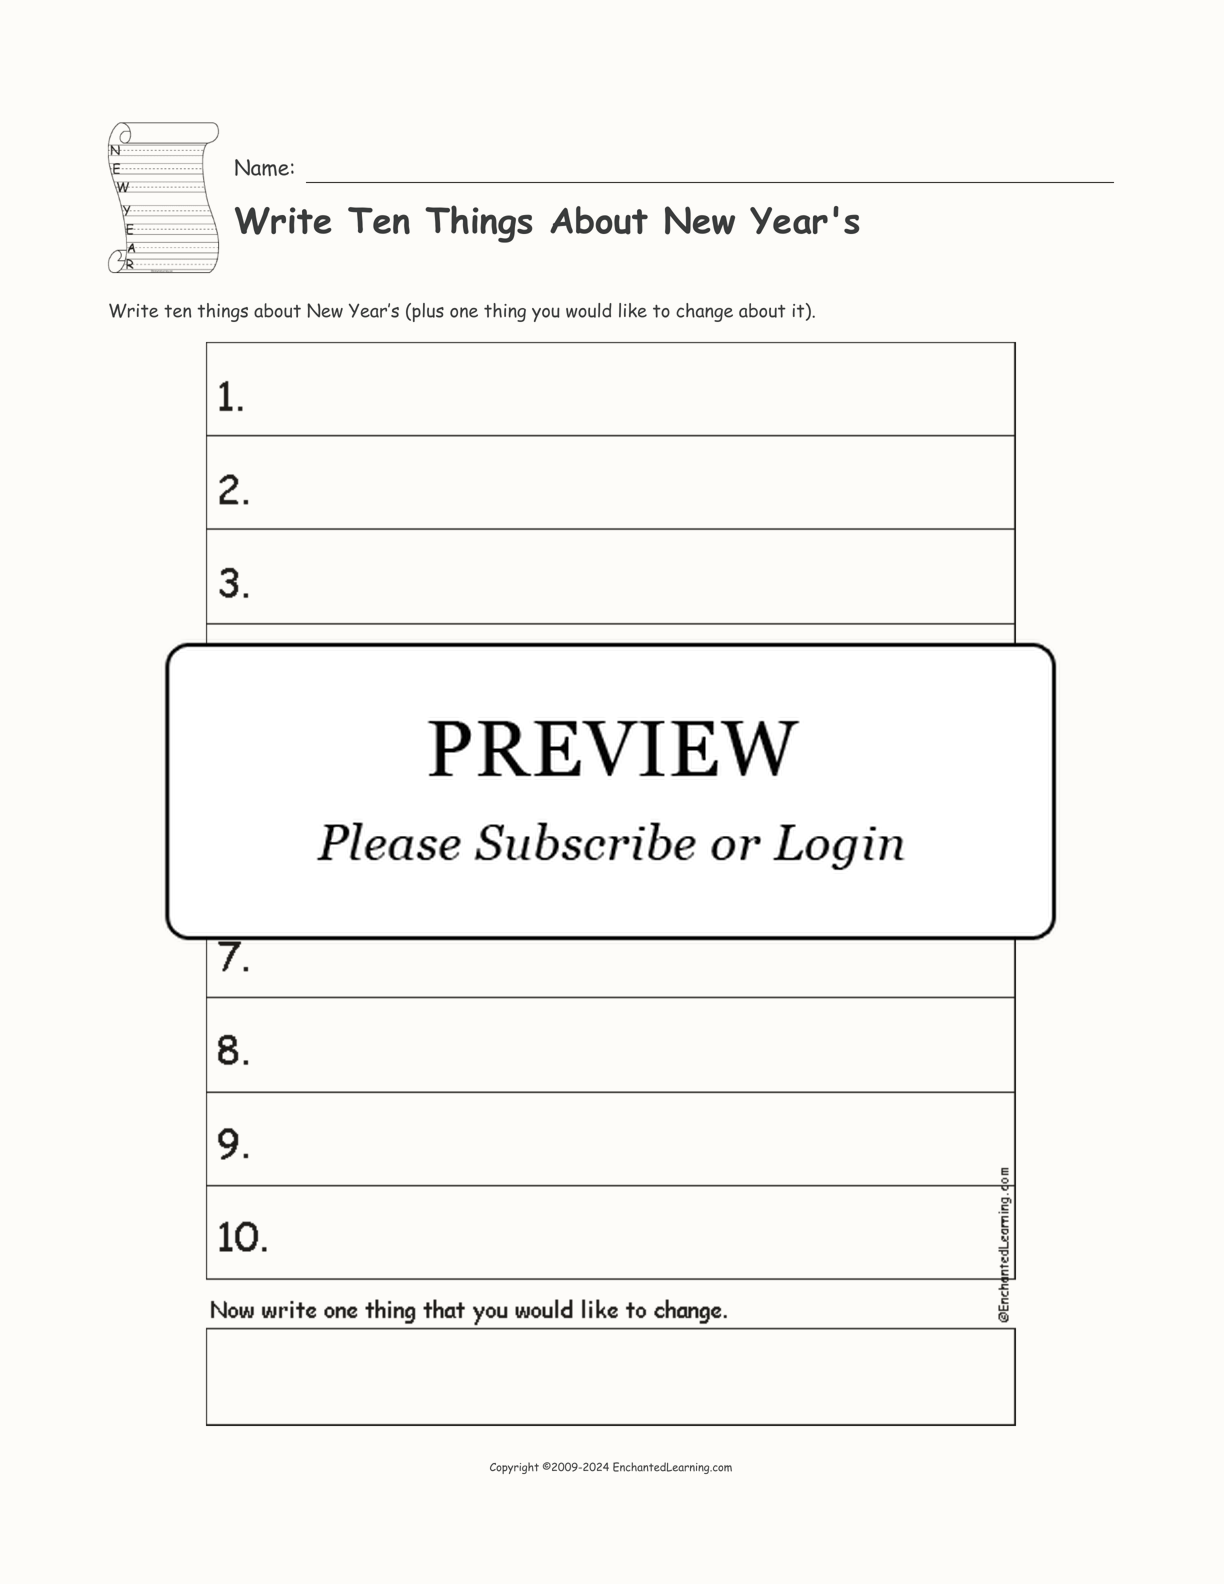 Write Ten Things About New Year's interactive printout page 1